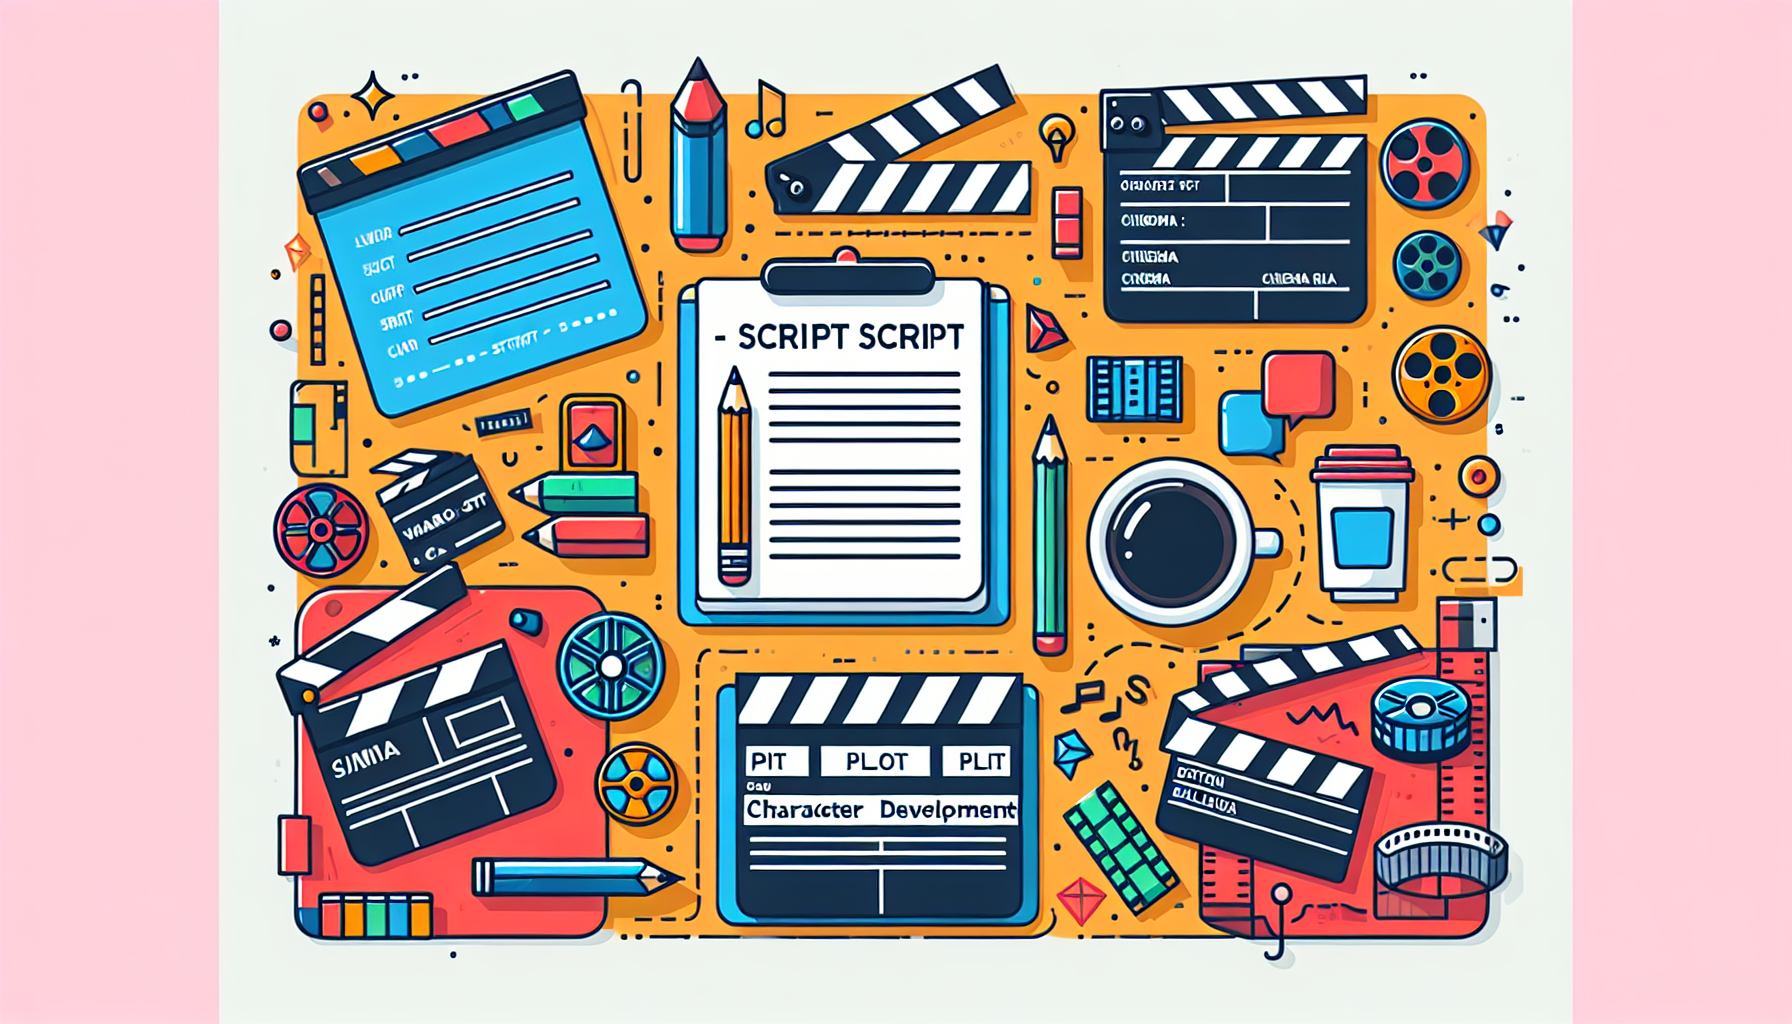 Create a colorful and modern graphical representation of a beginner's guide to crafting a short film script. Feature a clean desk setup with a desktop, a notepad with a pencil on it, a clapperboard, cinema rolls, and a coffee mug. Show various components of script writing such as character development, plot, dialogue, and formatting. Have each of these sections visually divided for clarity. Include creative and vivid color usage to make the illustration lively and pleasing to the eye.